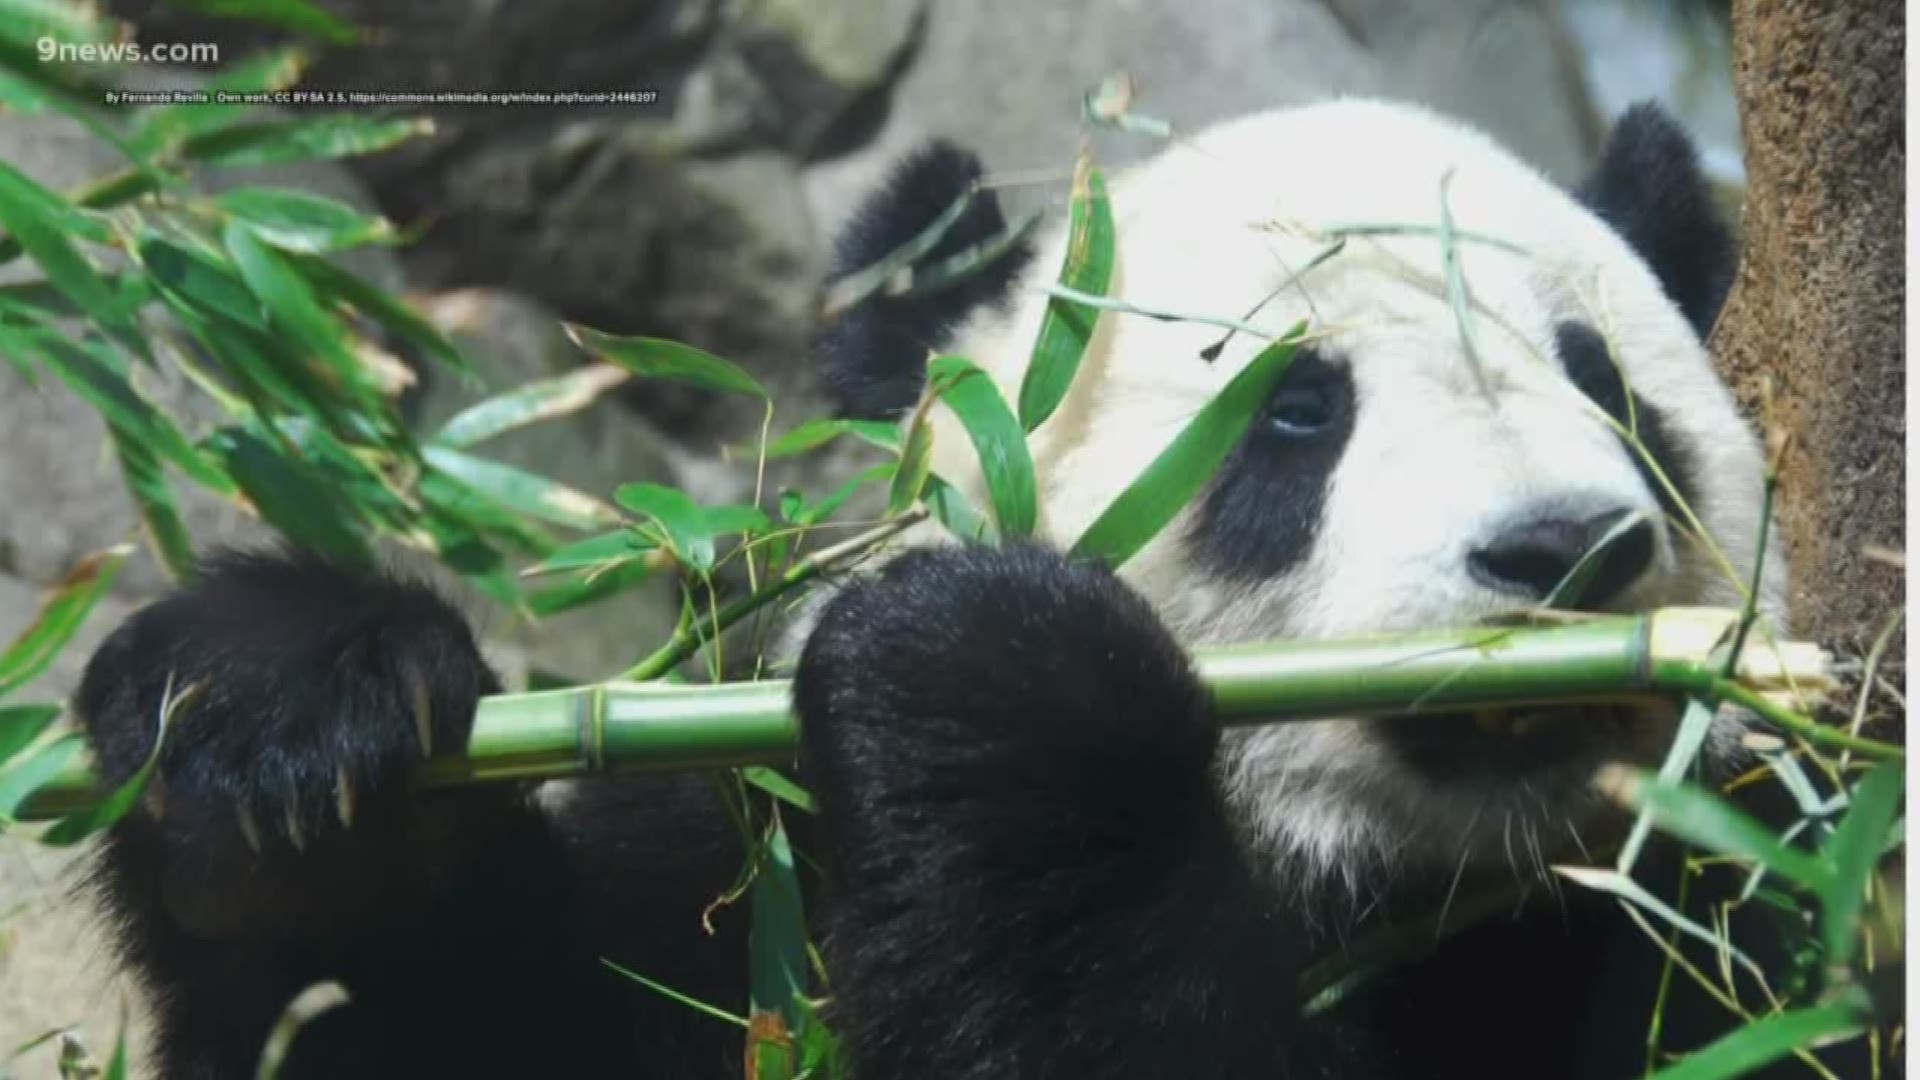 Up until 2016, the giant panda was considered endangered. Now, they are listed as vulnerable,  thanks to conservation efforts to increase their population.